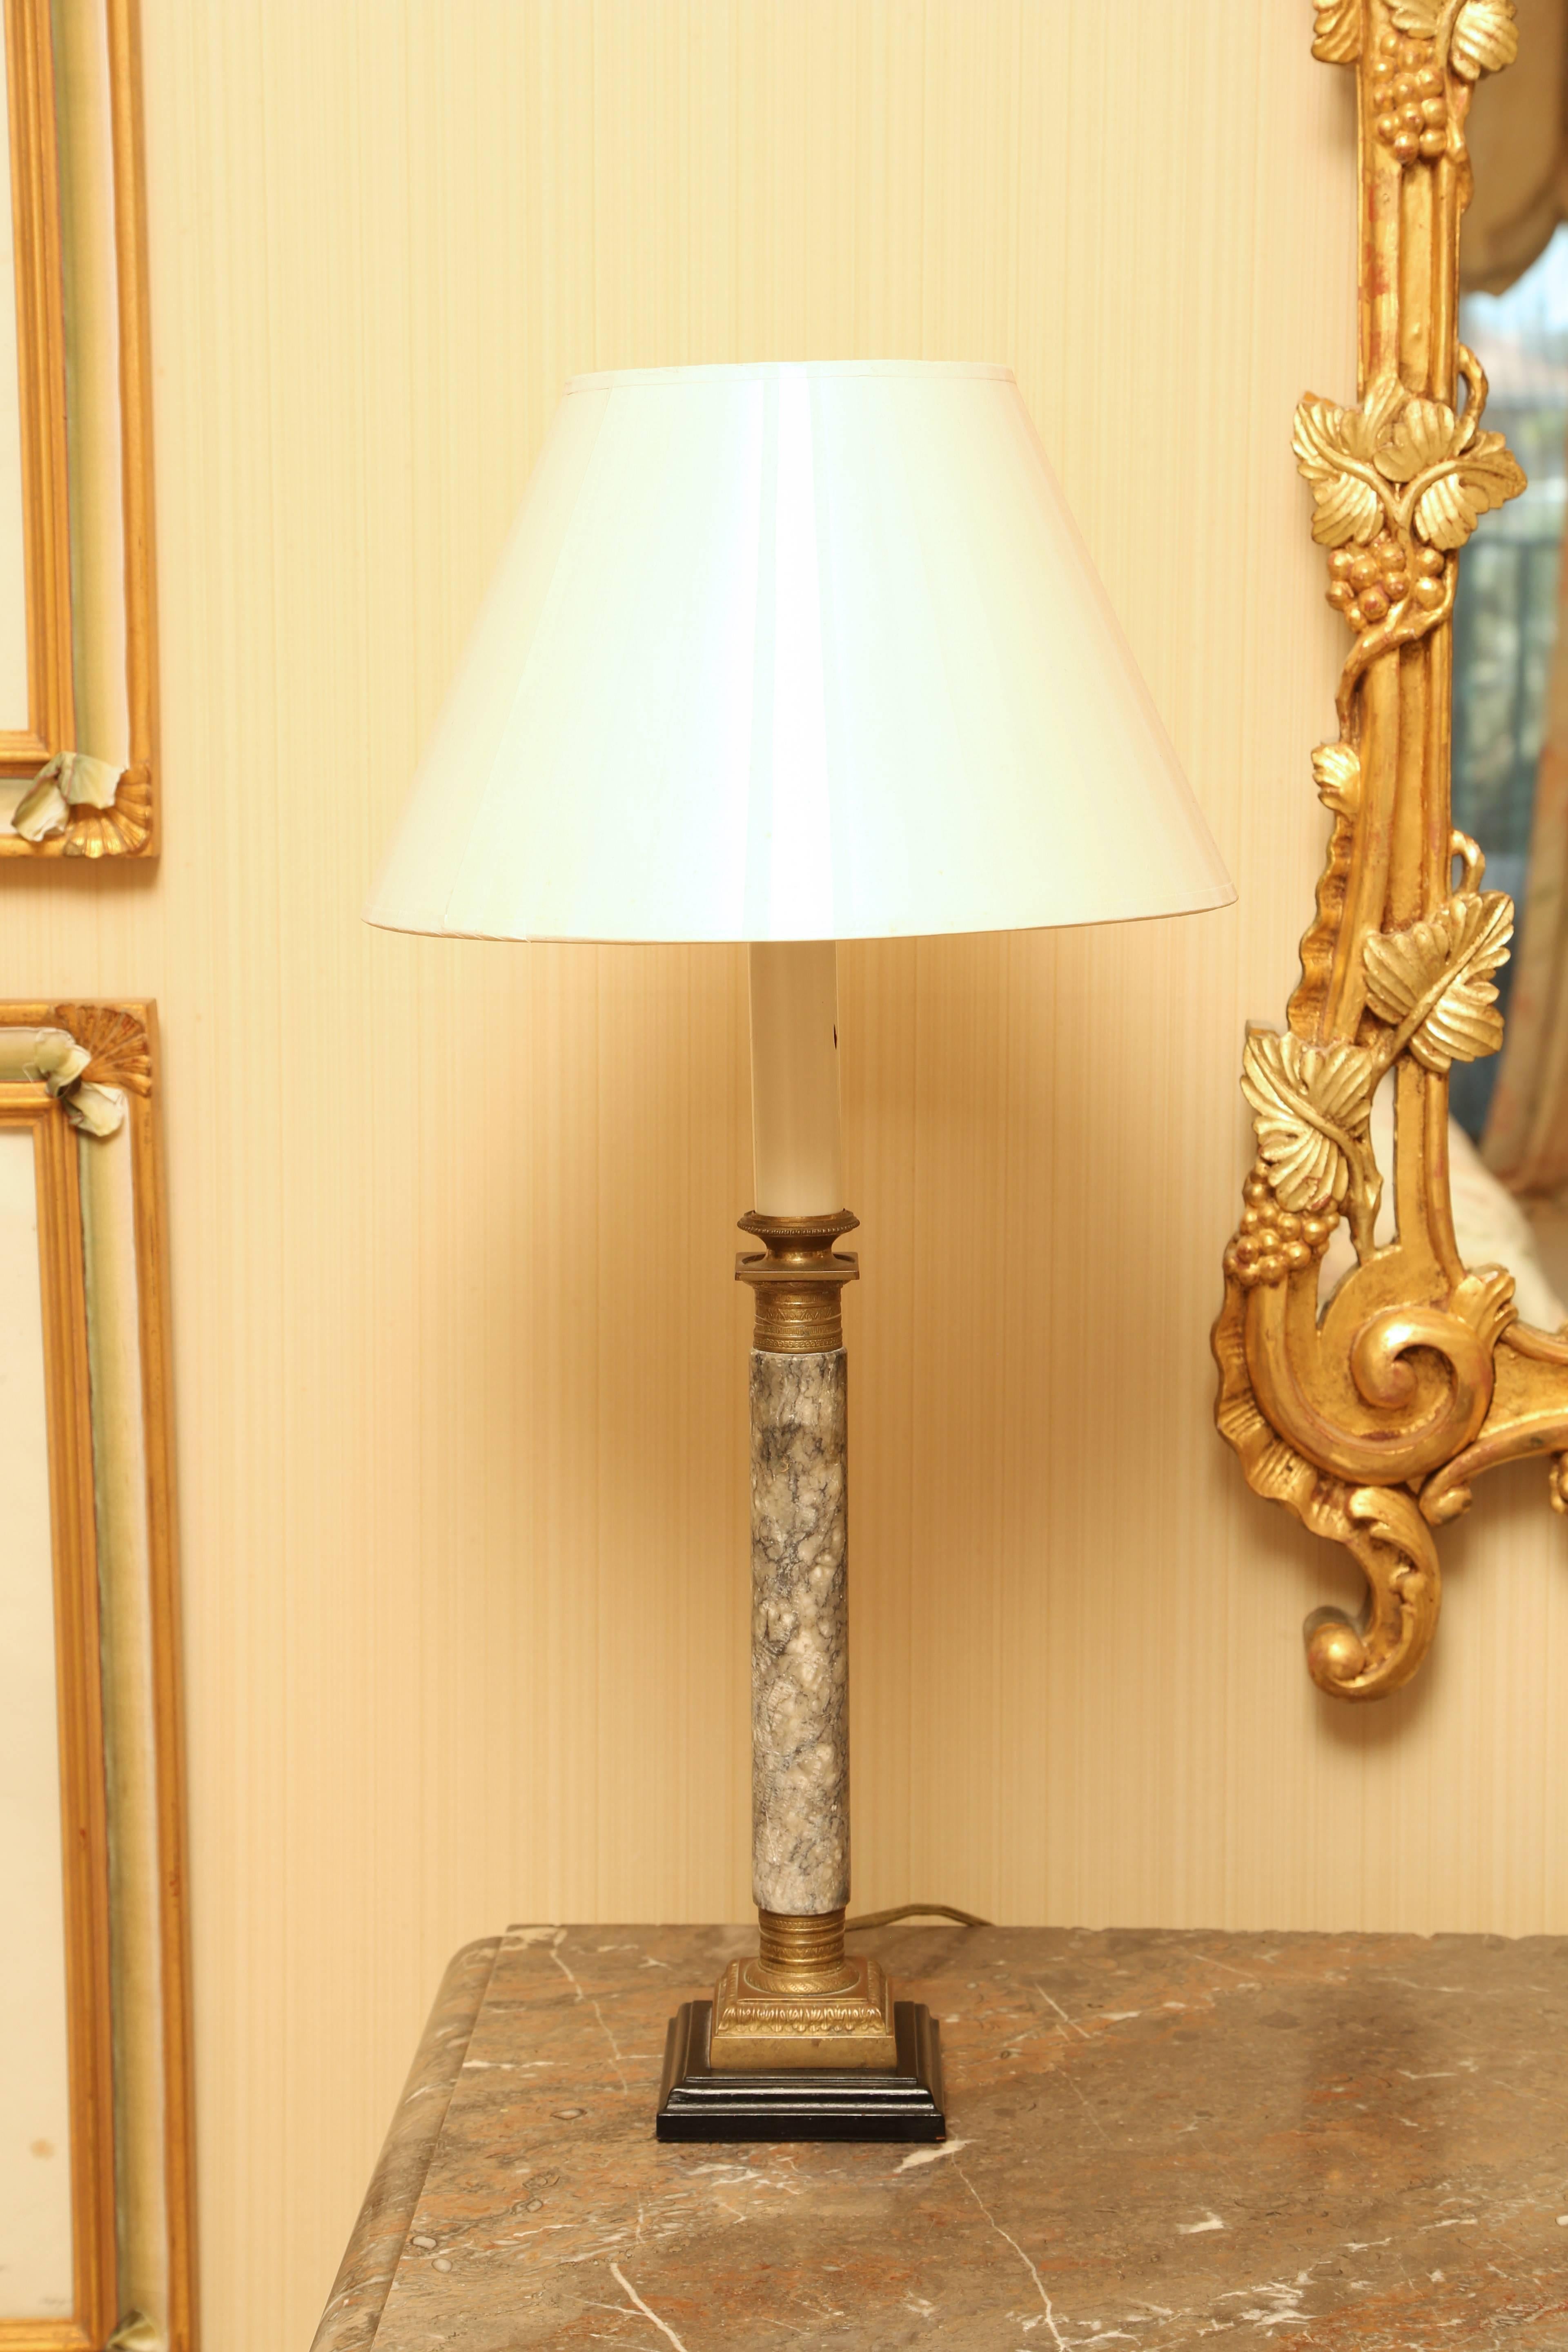 Each columnar gray marble candlestick with gilt bronze capital and base later mounted as a lamp. Each candlestick measures 12.75